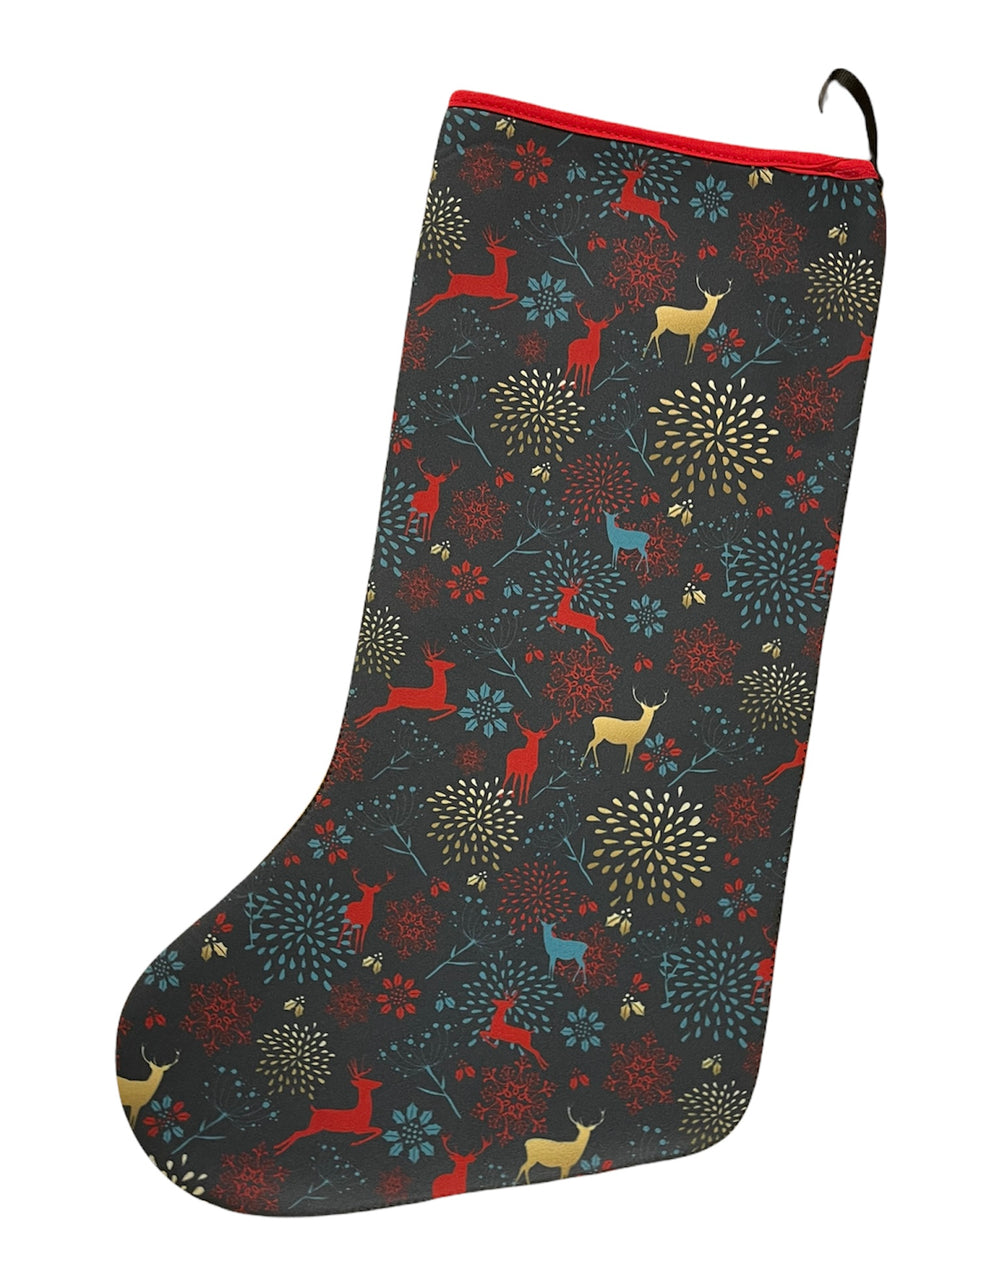 Large Stocking - The Teal Antler Boutique